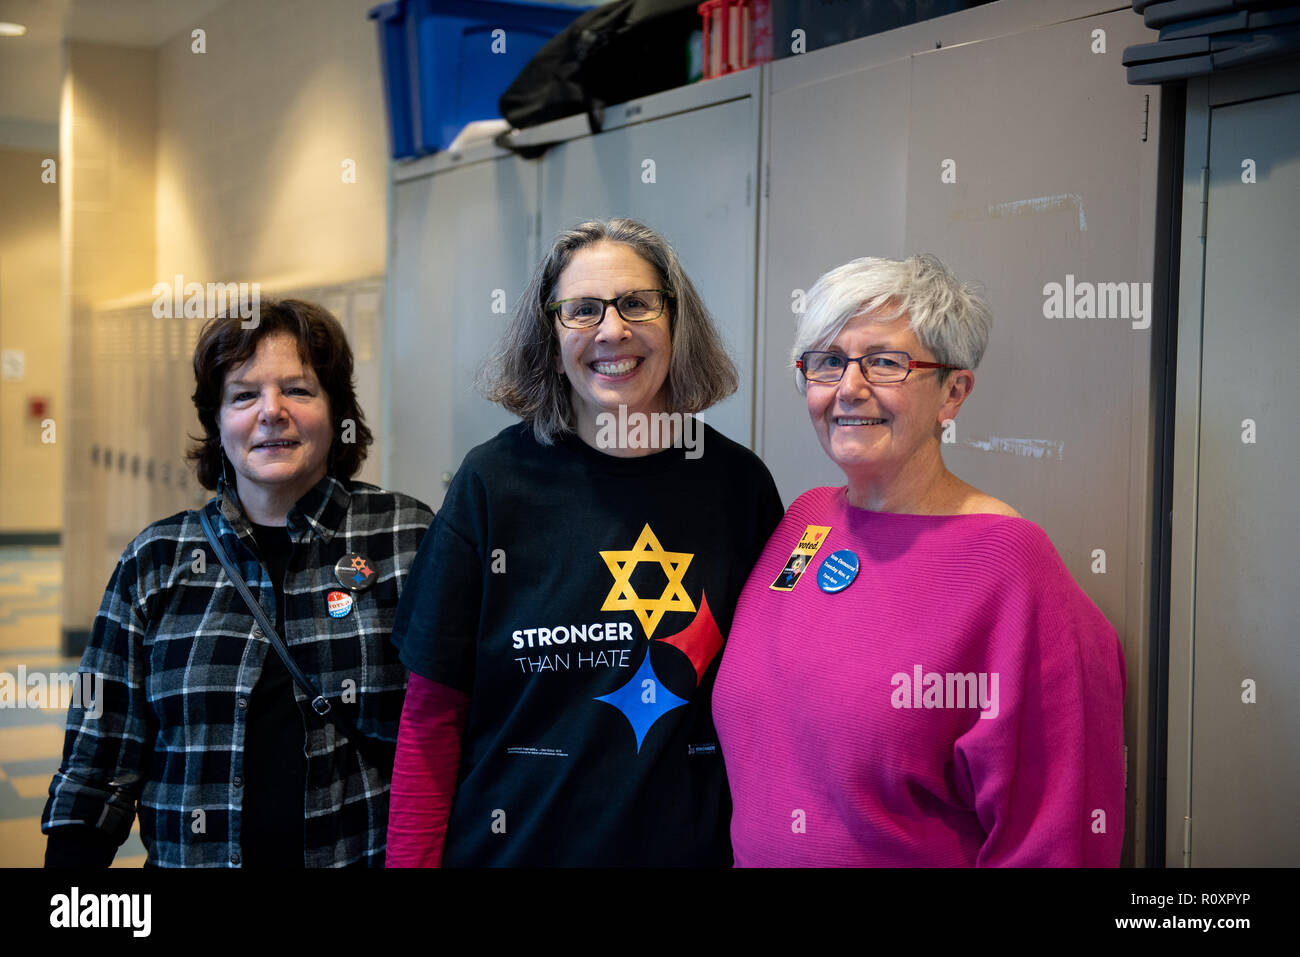 A poll worker is seen wearing a t shirt written on 'Stronger than Hate.'during the midterm elections in Pittsburgh, PA in the aftermath of the Tree of Life shootings. Stock Photo